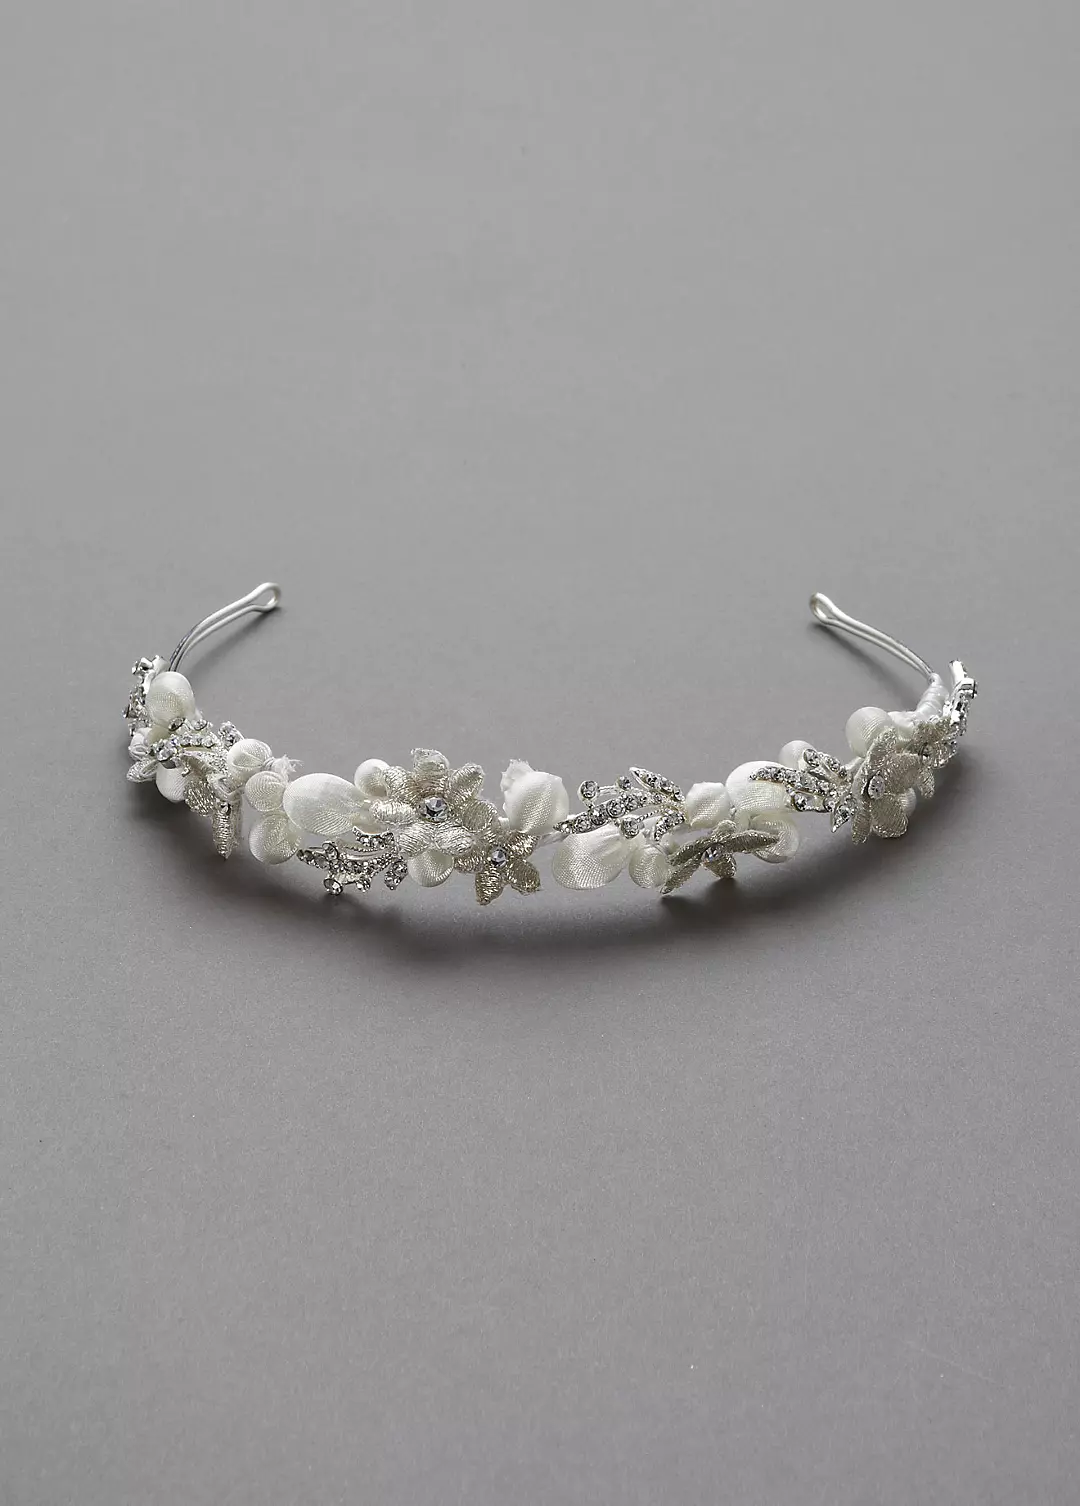 Embellished Headband with Flowers and Crystals Image